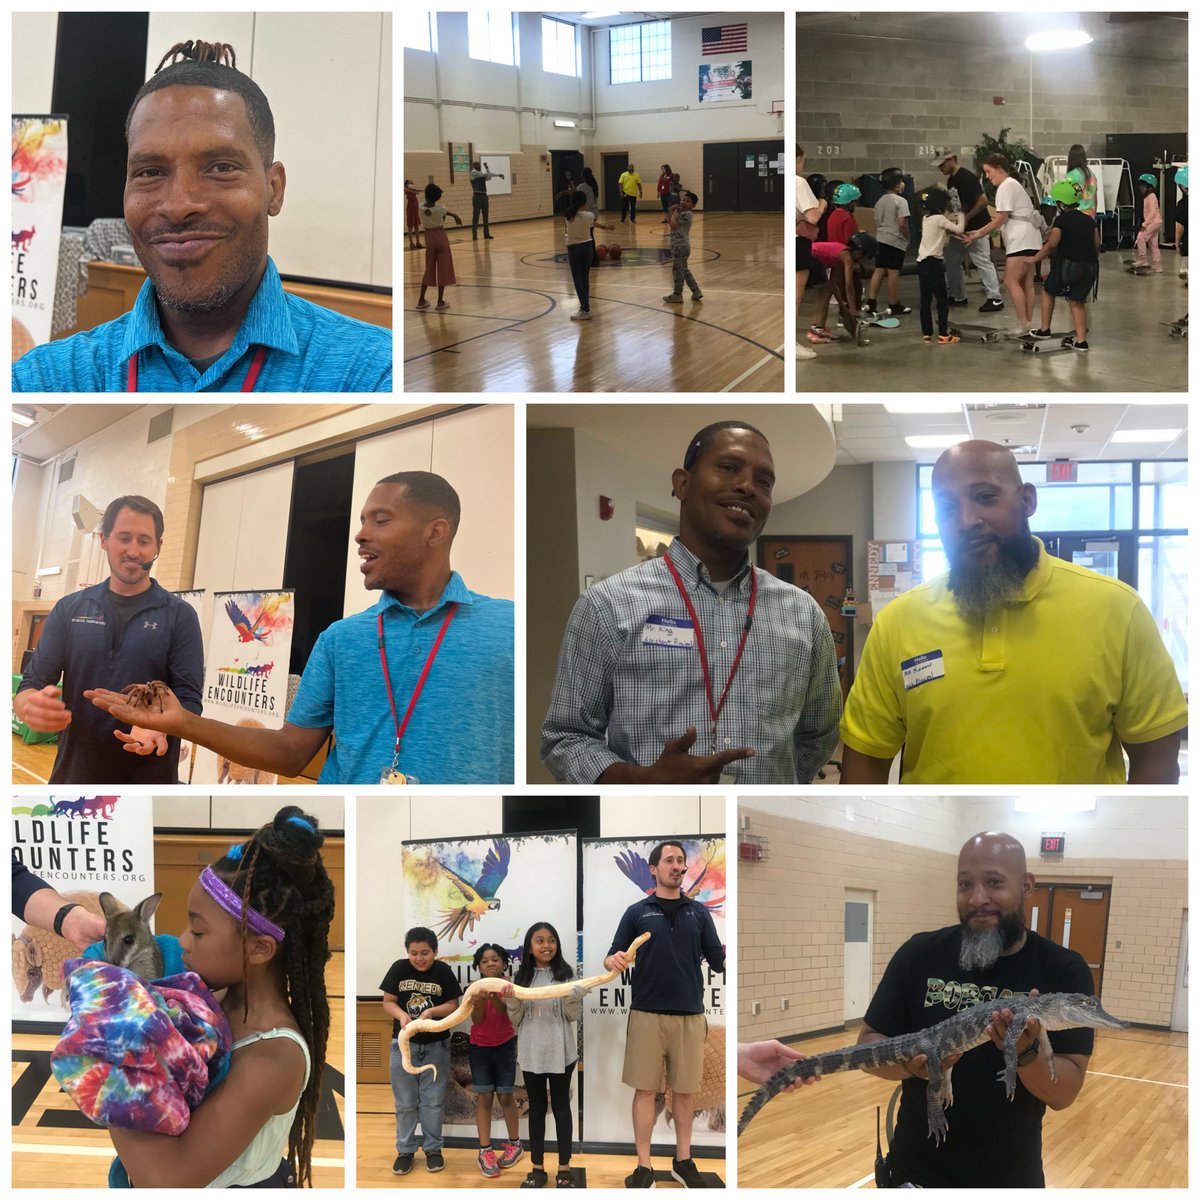 #NextLevelLearning Its been exciting to work as #NLL assistant principal at Kennedy alongside NLL Principal Elijah Simmons. Great first week! Academic focus in the am, enrichment activities in the pm. Our students are excited to be here, it’s going to be a great summer! #OPSProud